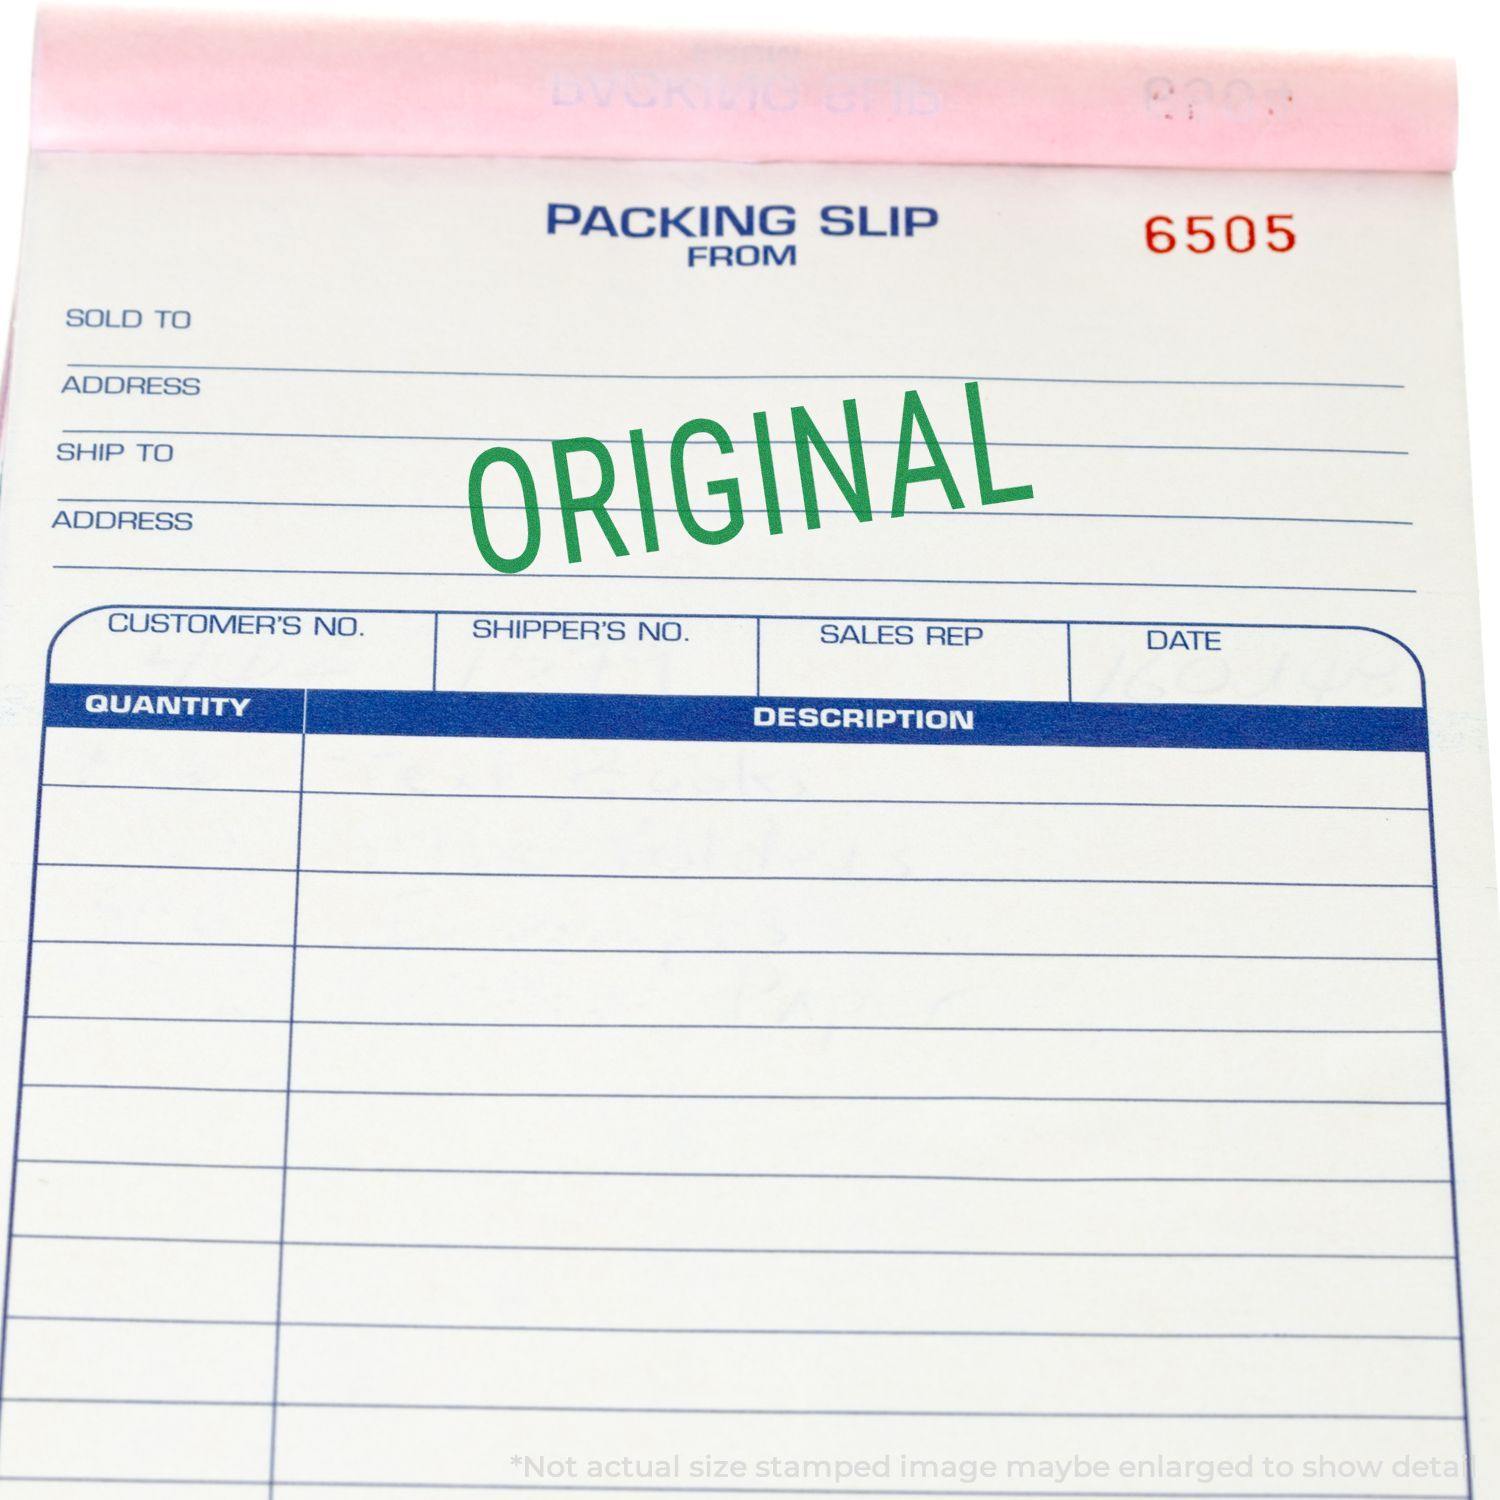 A stock office rubber stamp with a stamped image showing how the text "ORIGINAL" in a narrow font is displayed after stamping.